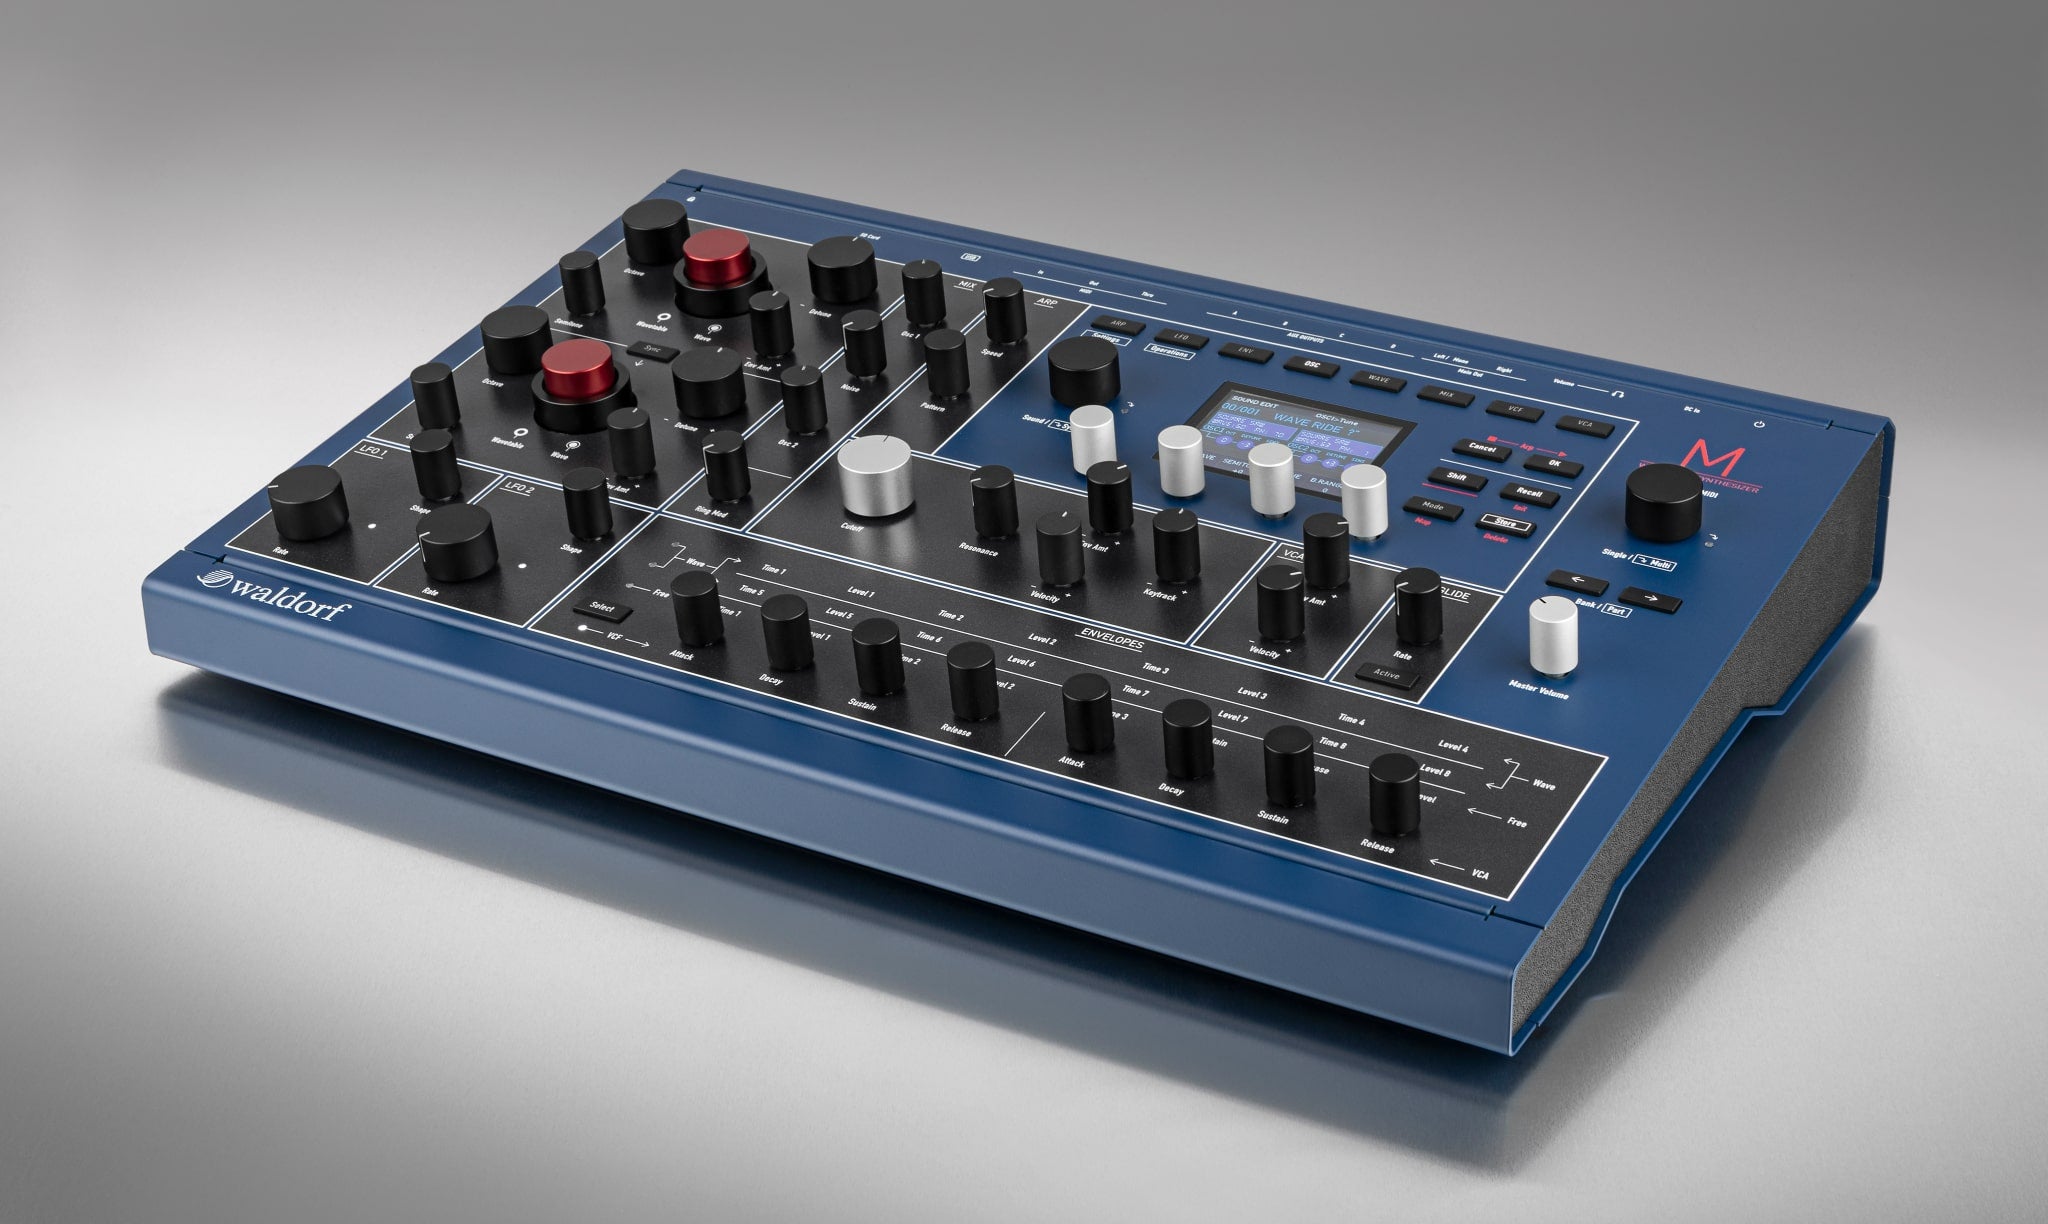 Waldorf M wavetable synthesizer front